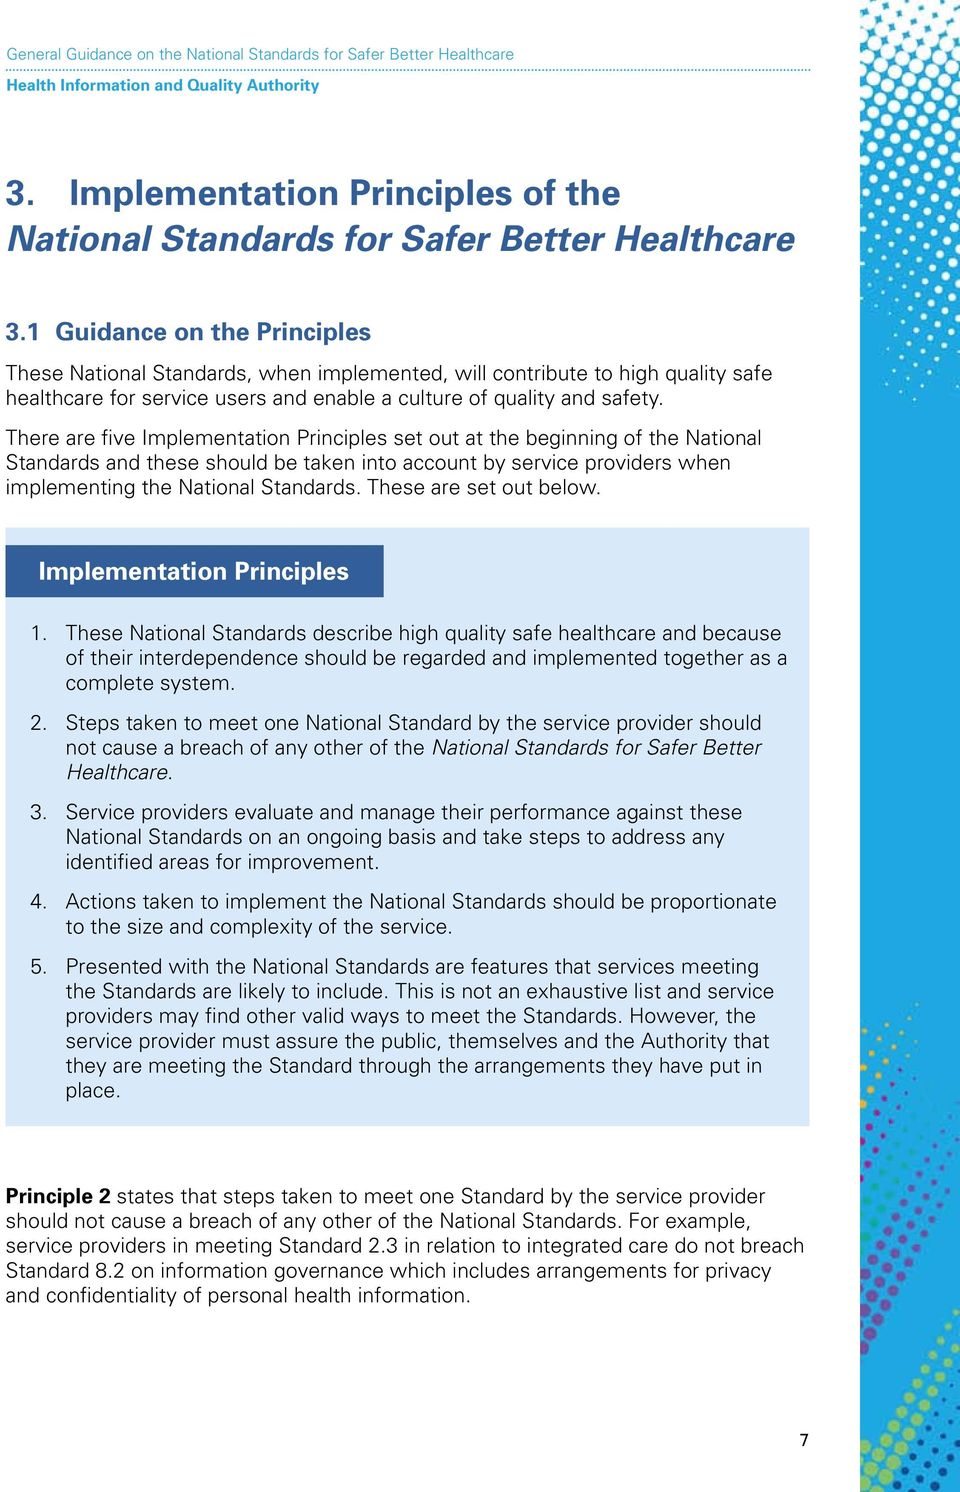 There are five Implementation Principles set out at the beginning of the National Standards and these should be taken into account by service providers when implementing the National Standards.